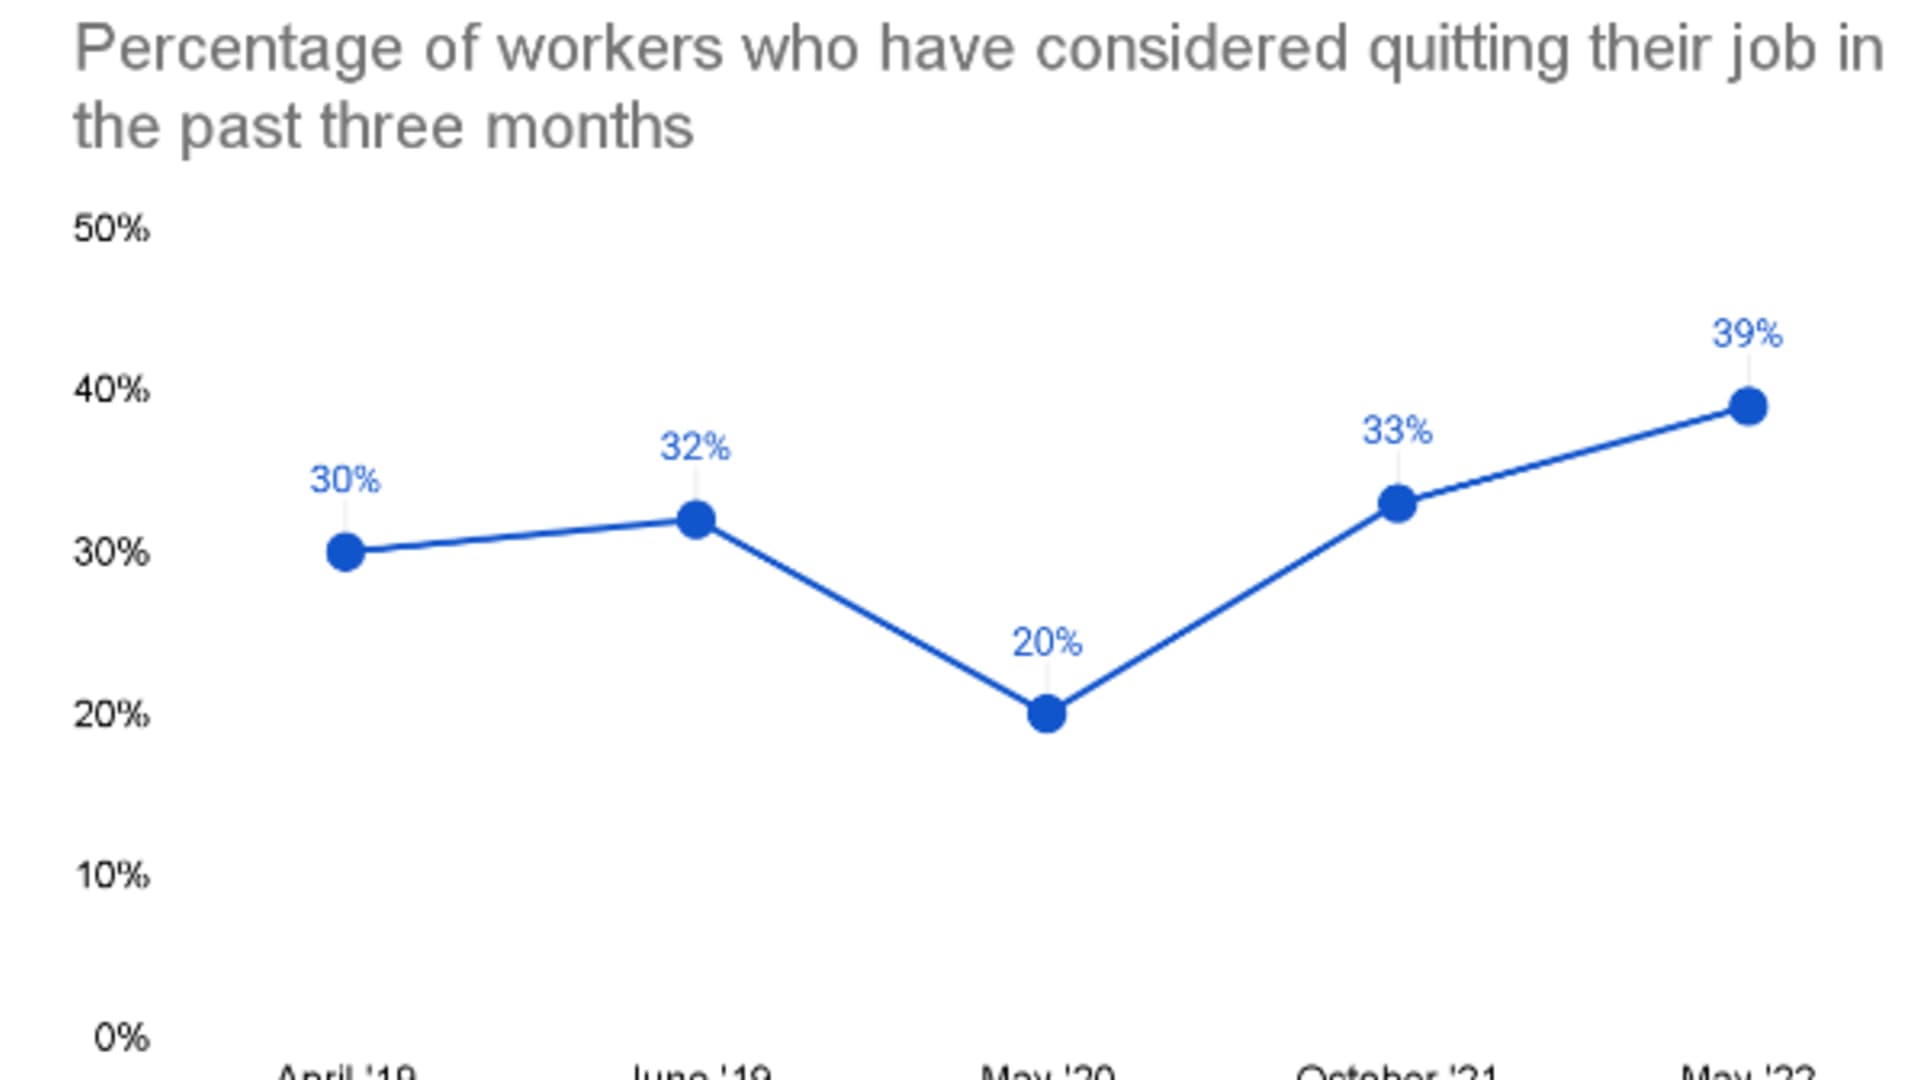 The percentage of workers thinking about quitting their job is at a survey peak.